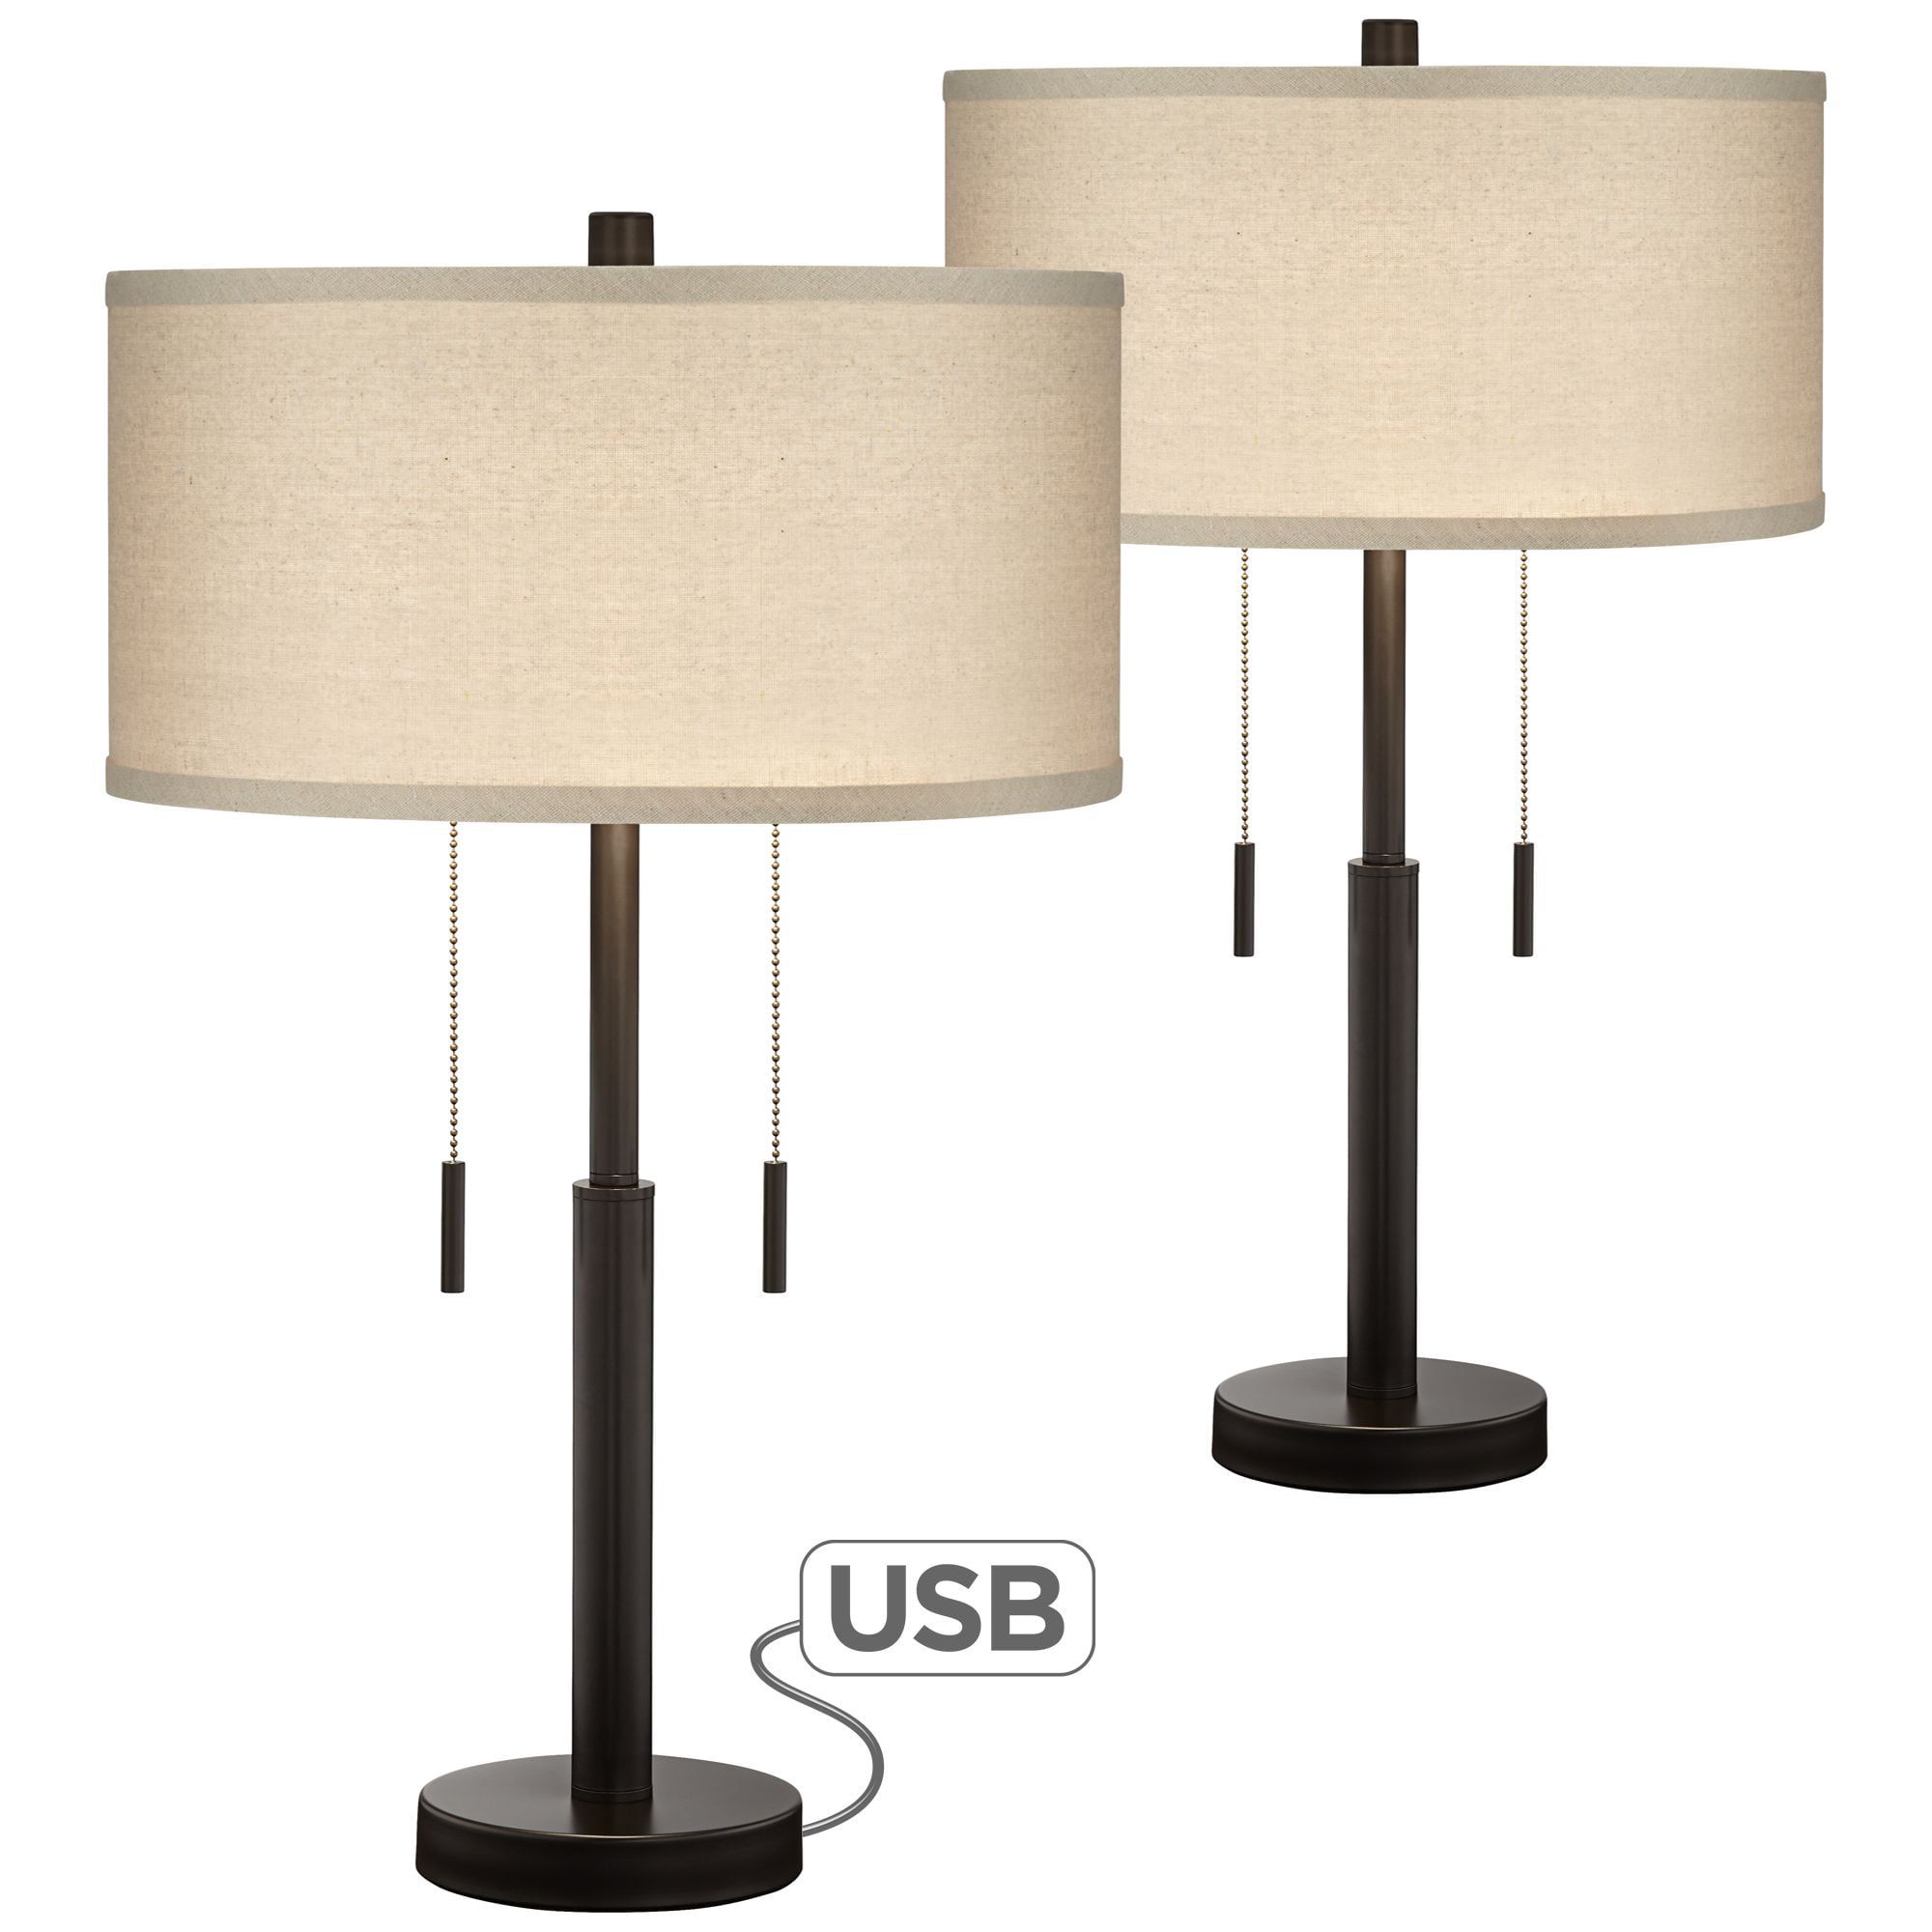 Franklin Iron Works Industrial Table Lamps 25" High Set Of 2 With Hotel  Style Usb Charging Port Rich Bronze Drum Shade For Living Room Desk Bedroom  – Walmart Inside Floor Lamps With Usb Charge (View 12 of 15)